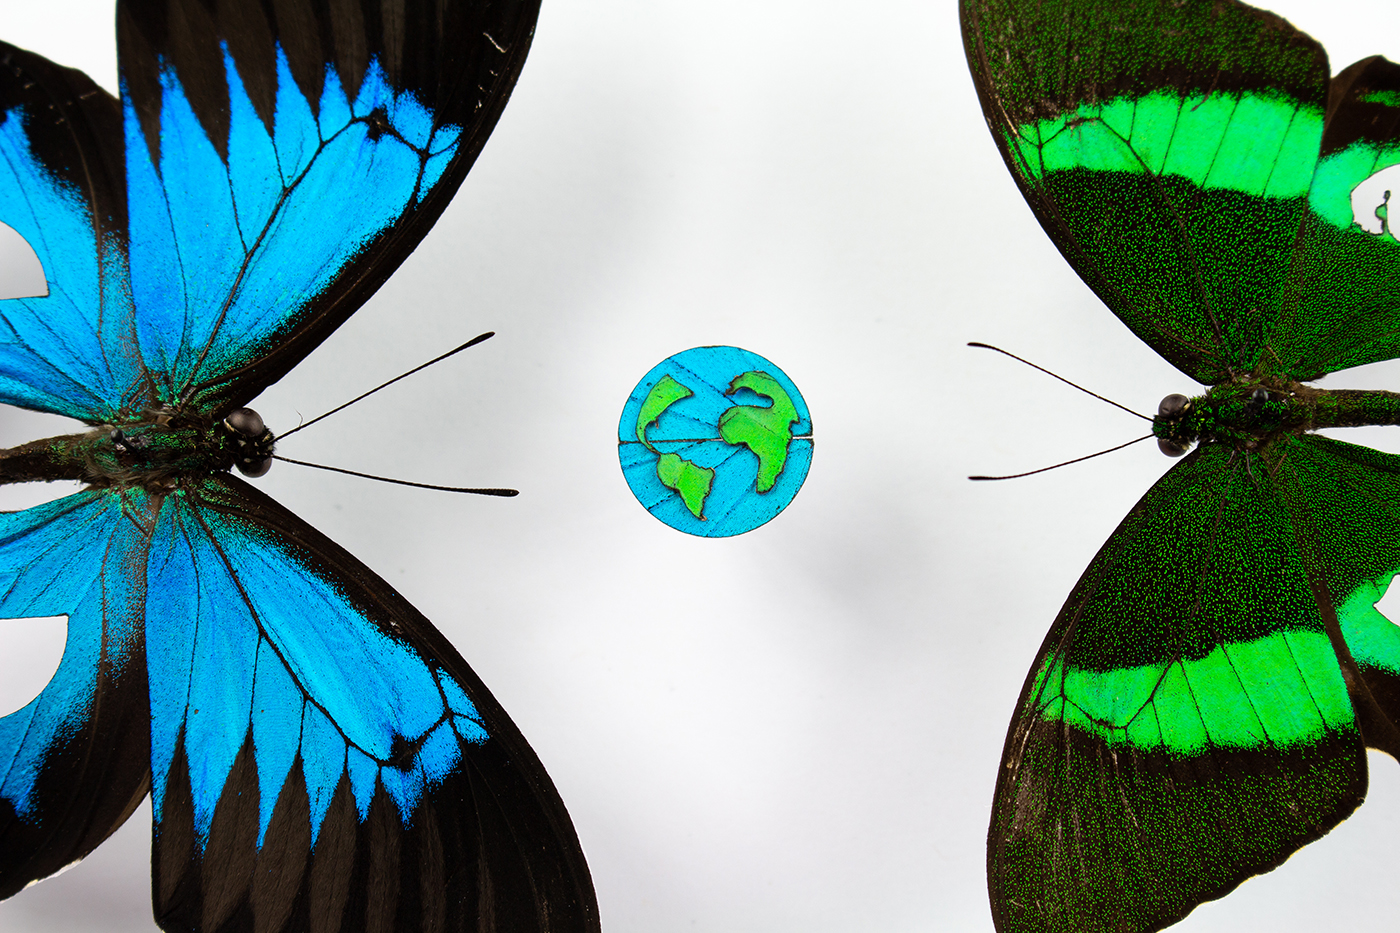 Greta taxidermy artwork closeup image, showing two real butterflies cut into planet earth